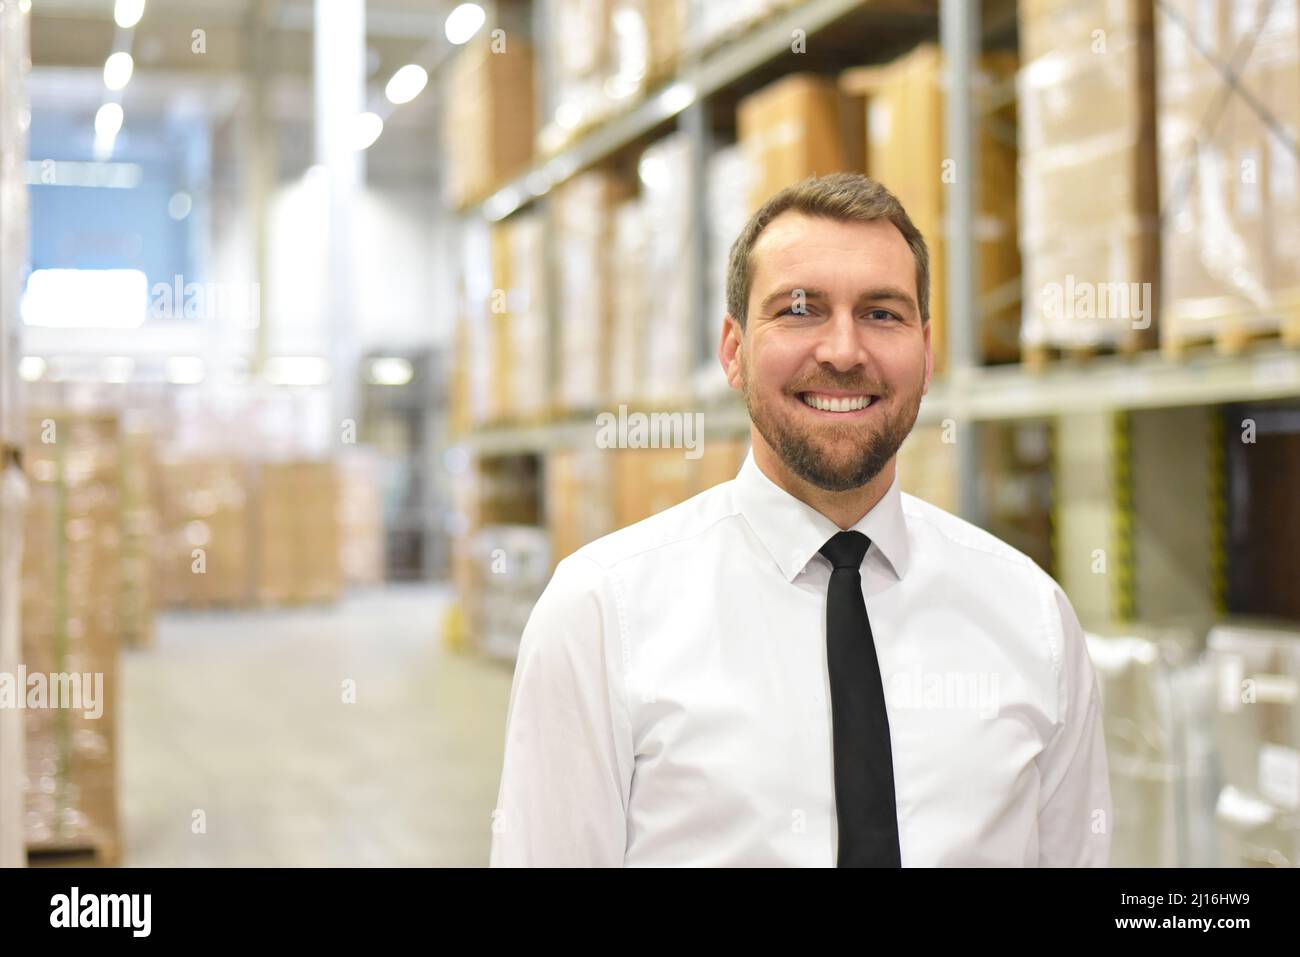 portrait friendly businessman/ manager in suit working in the warehouse of a company Stock Photo